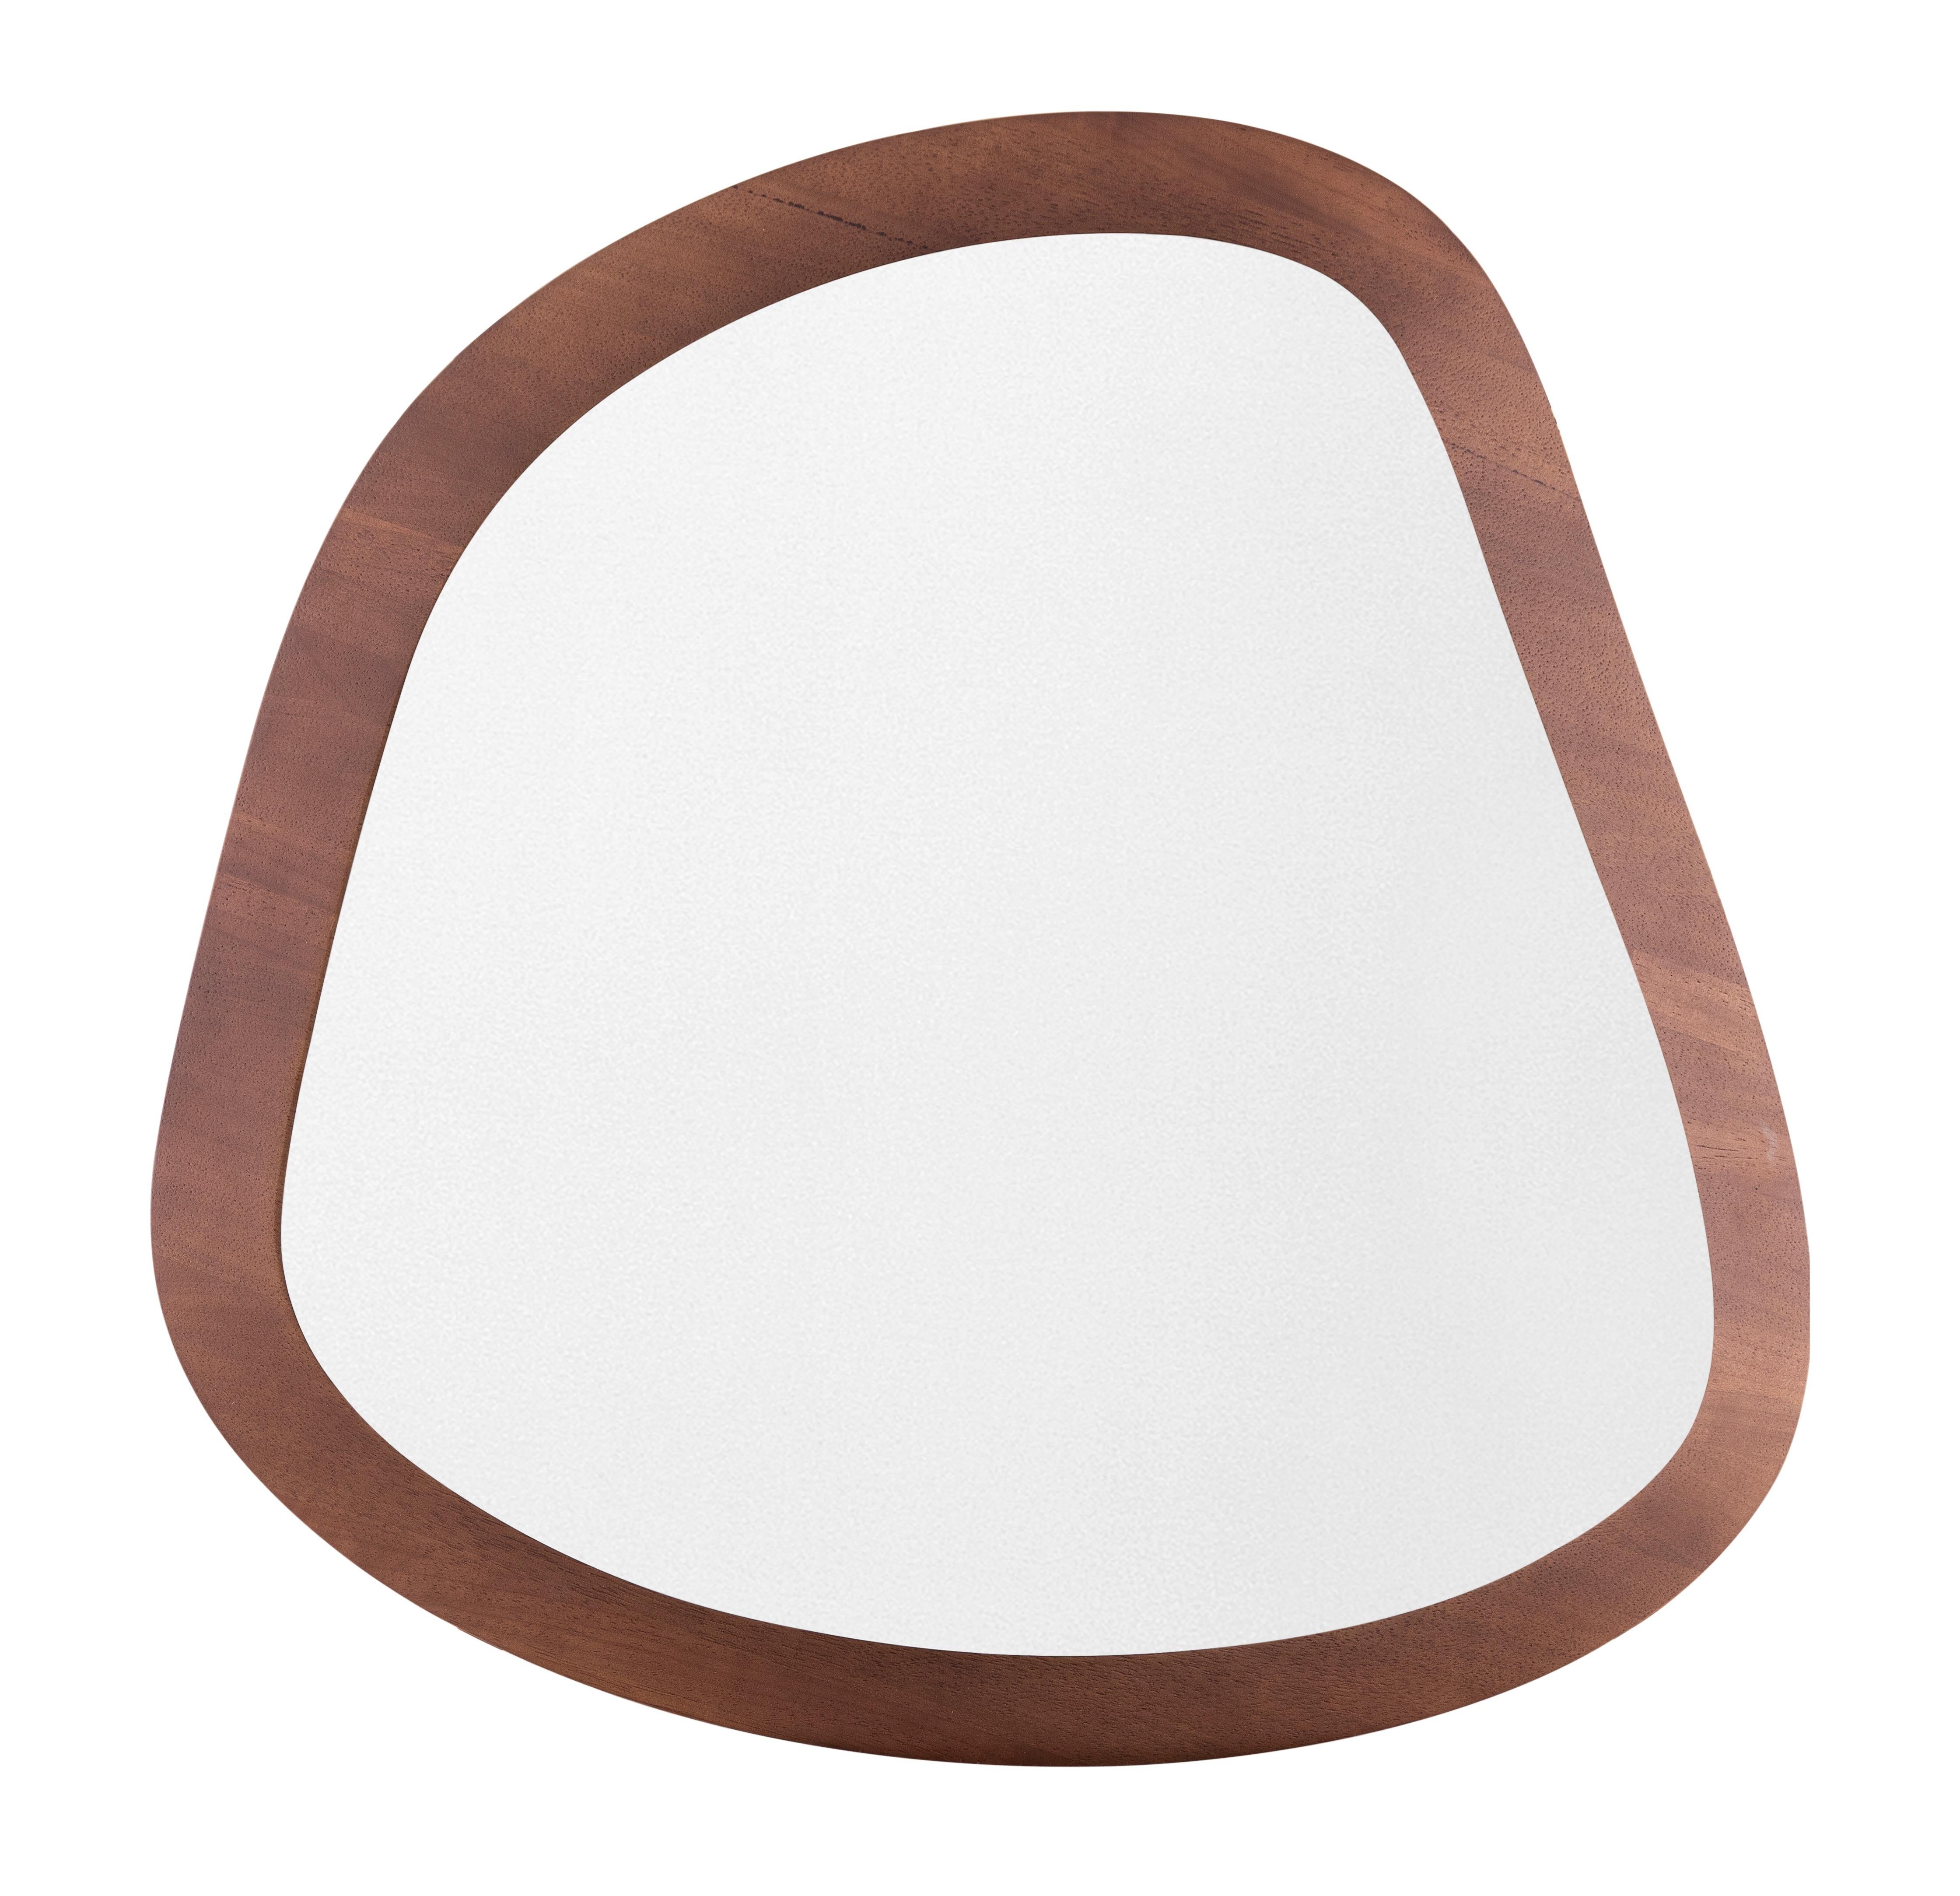 The organic shapes that form the Pantê series of mirrors are inspired by the pattern of spots seen on a jaguar’s coat. The woodwork design frames the mirror, incorporating elements of nature into the home. The solid wood of the frame incorporated